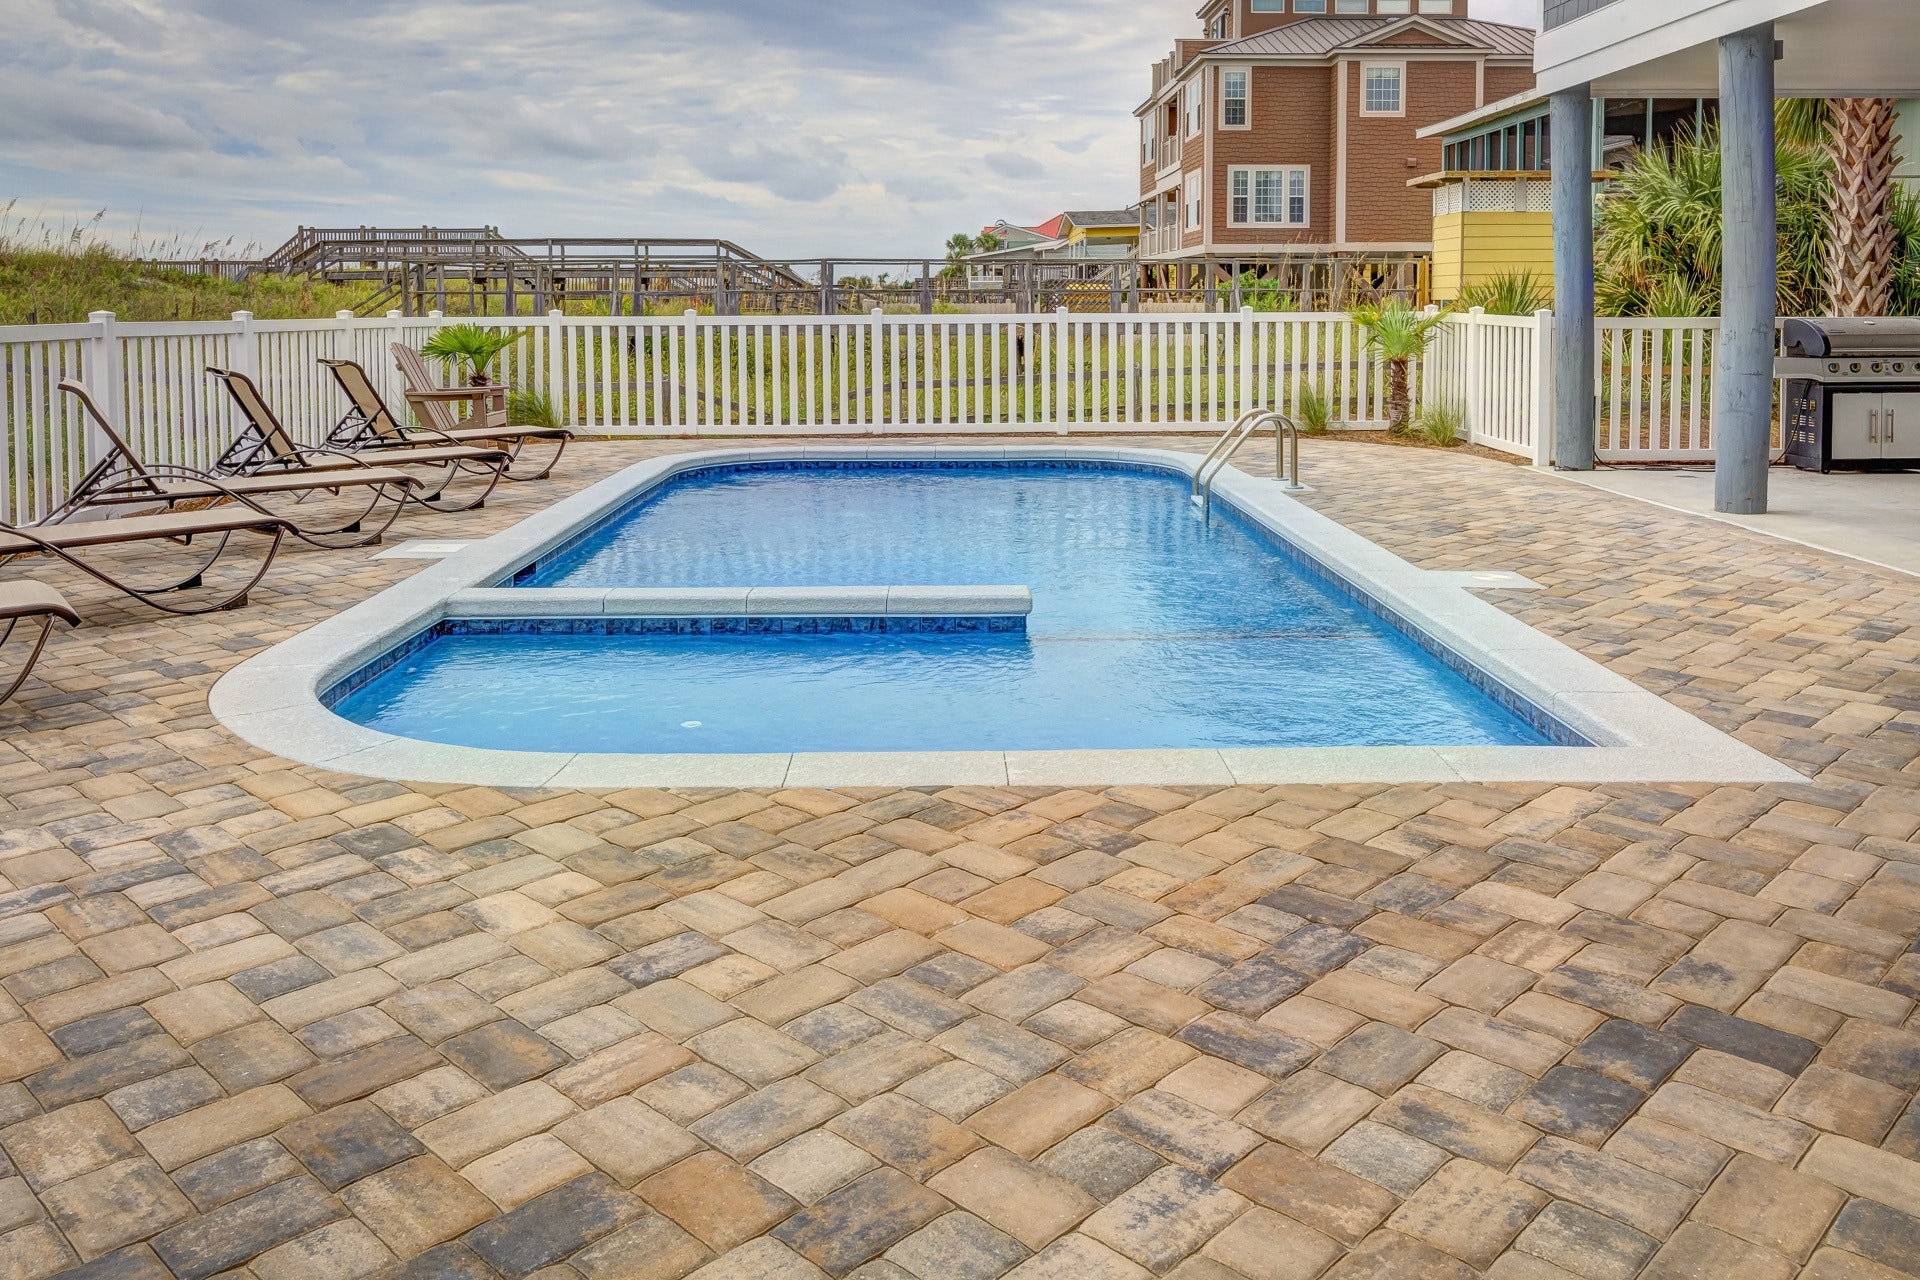 What Benefits Do 3D Pool Designs Offer Homeowners